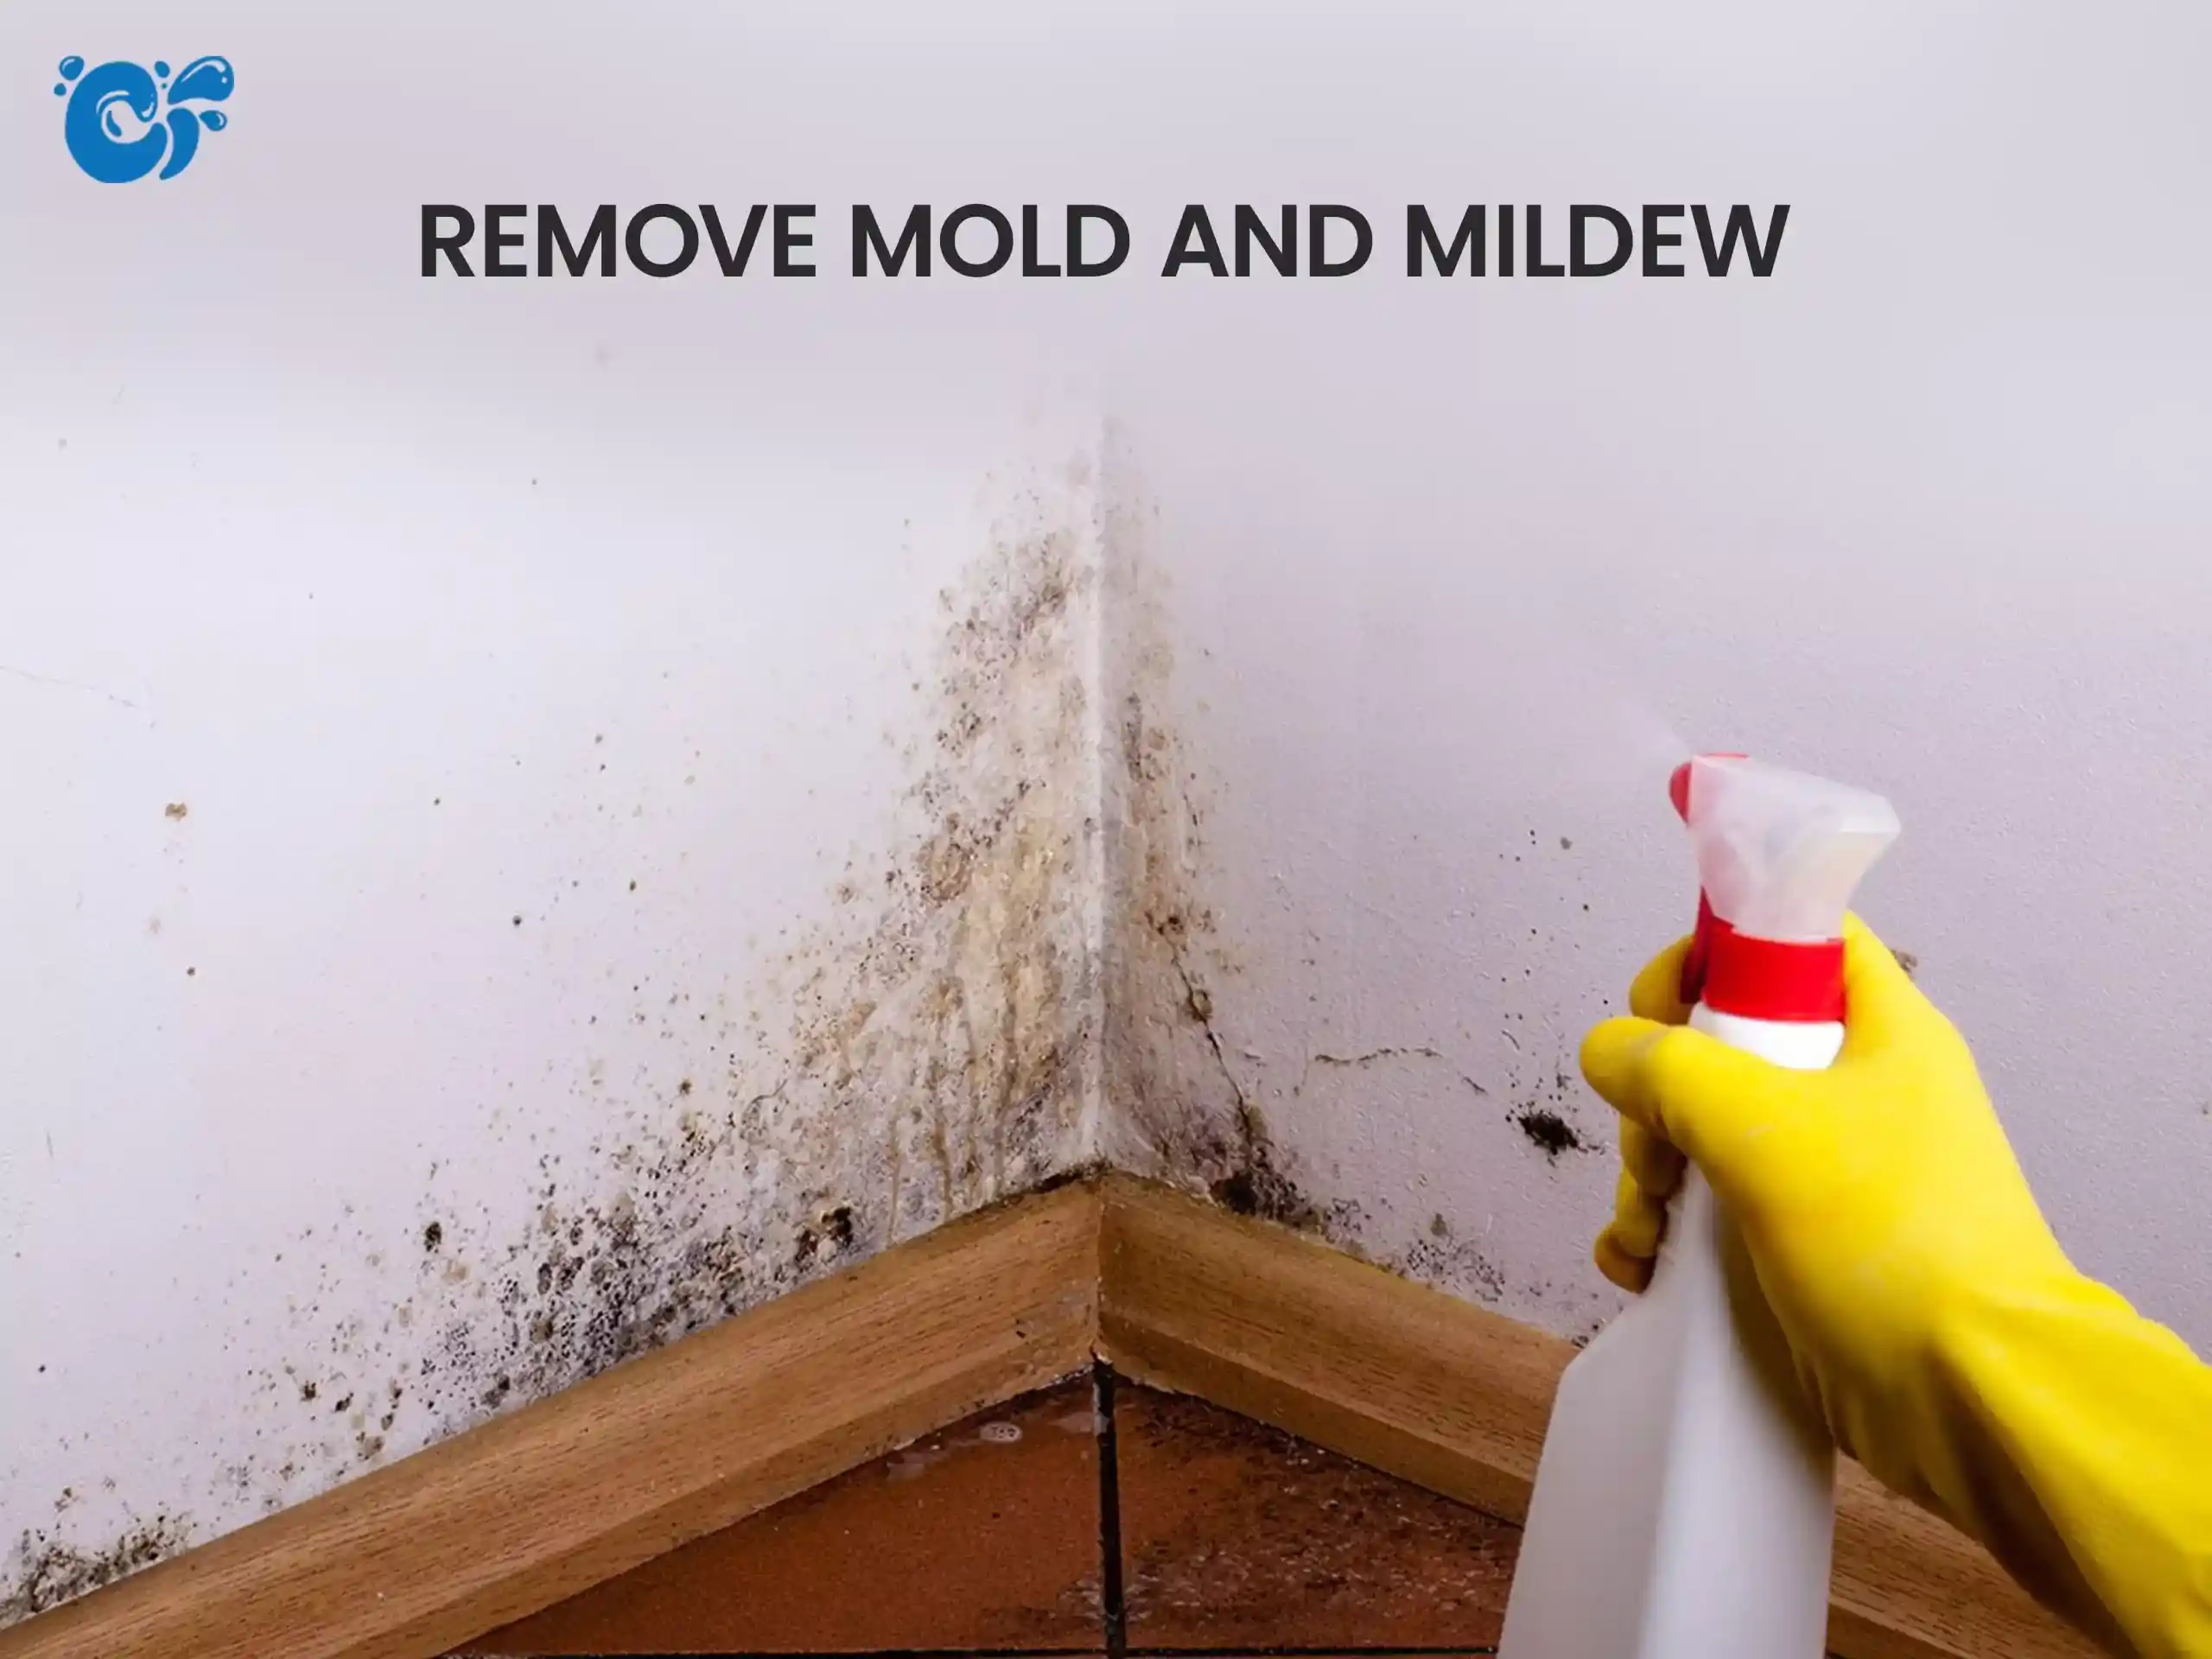 Remove Mold and Mildew